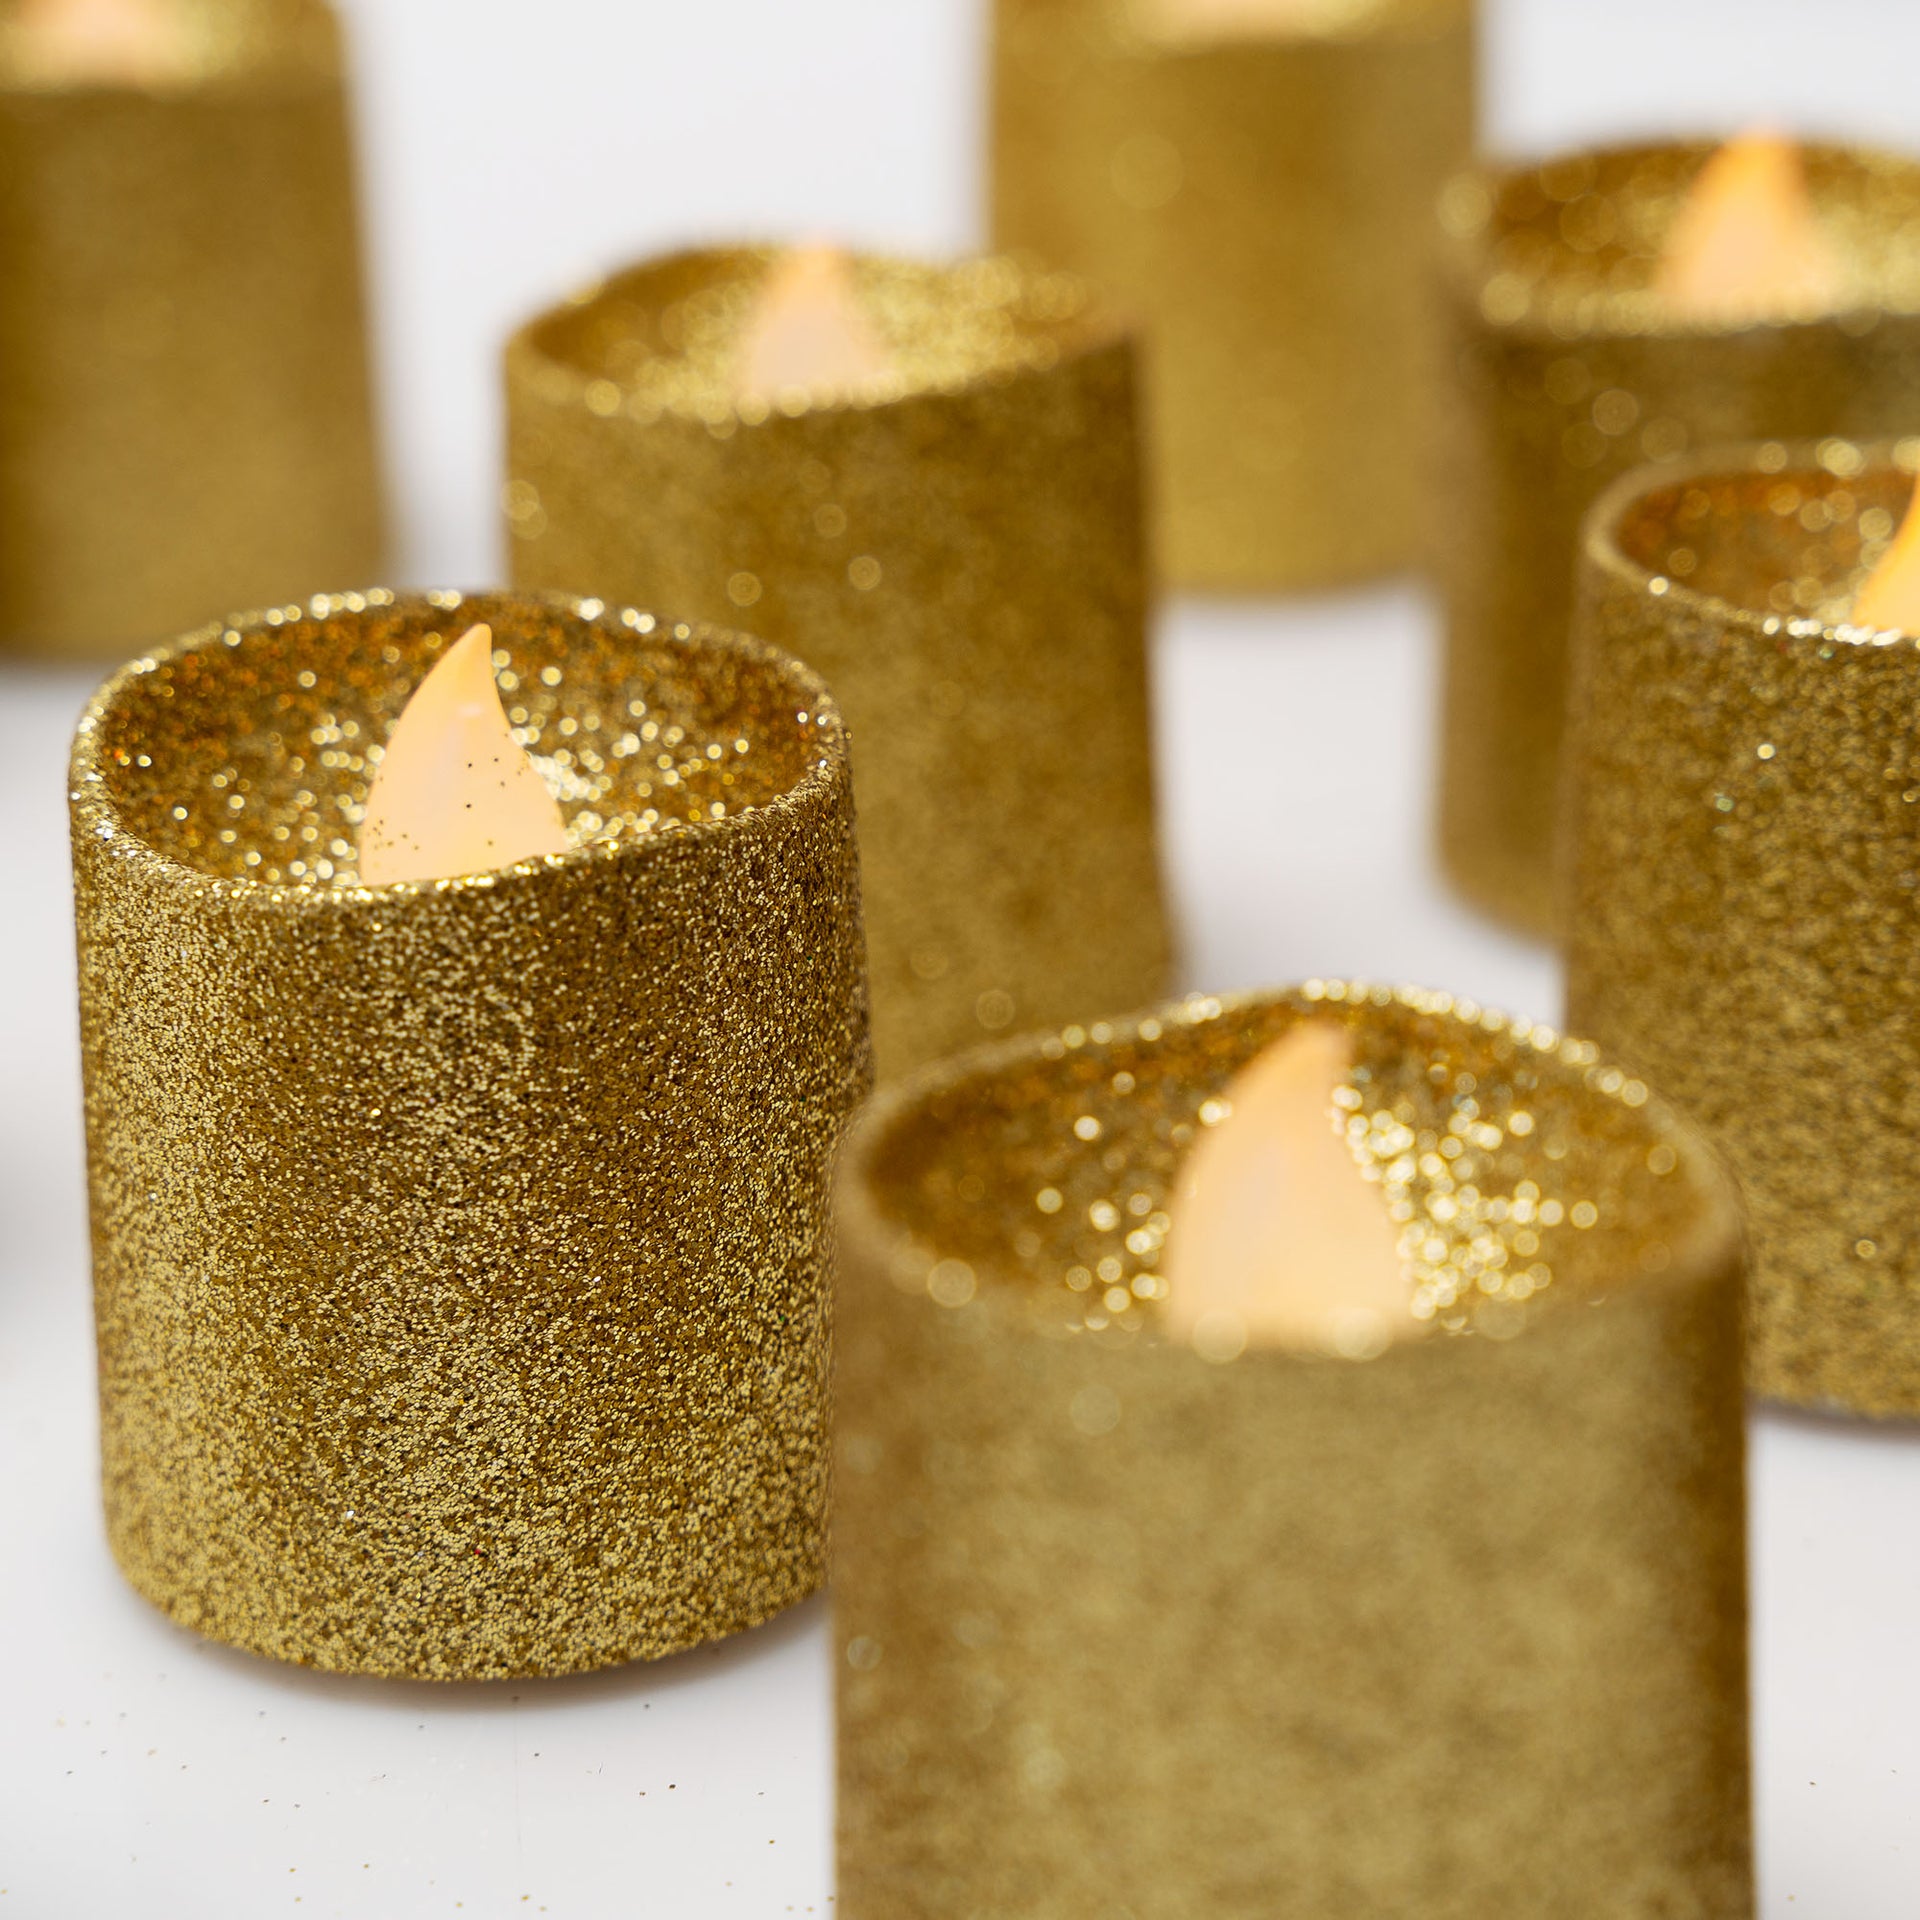 LED Gold Glitter Tea Light Flameless Faux Wax Candles 12 Pack - West Ivory LED Lighting 